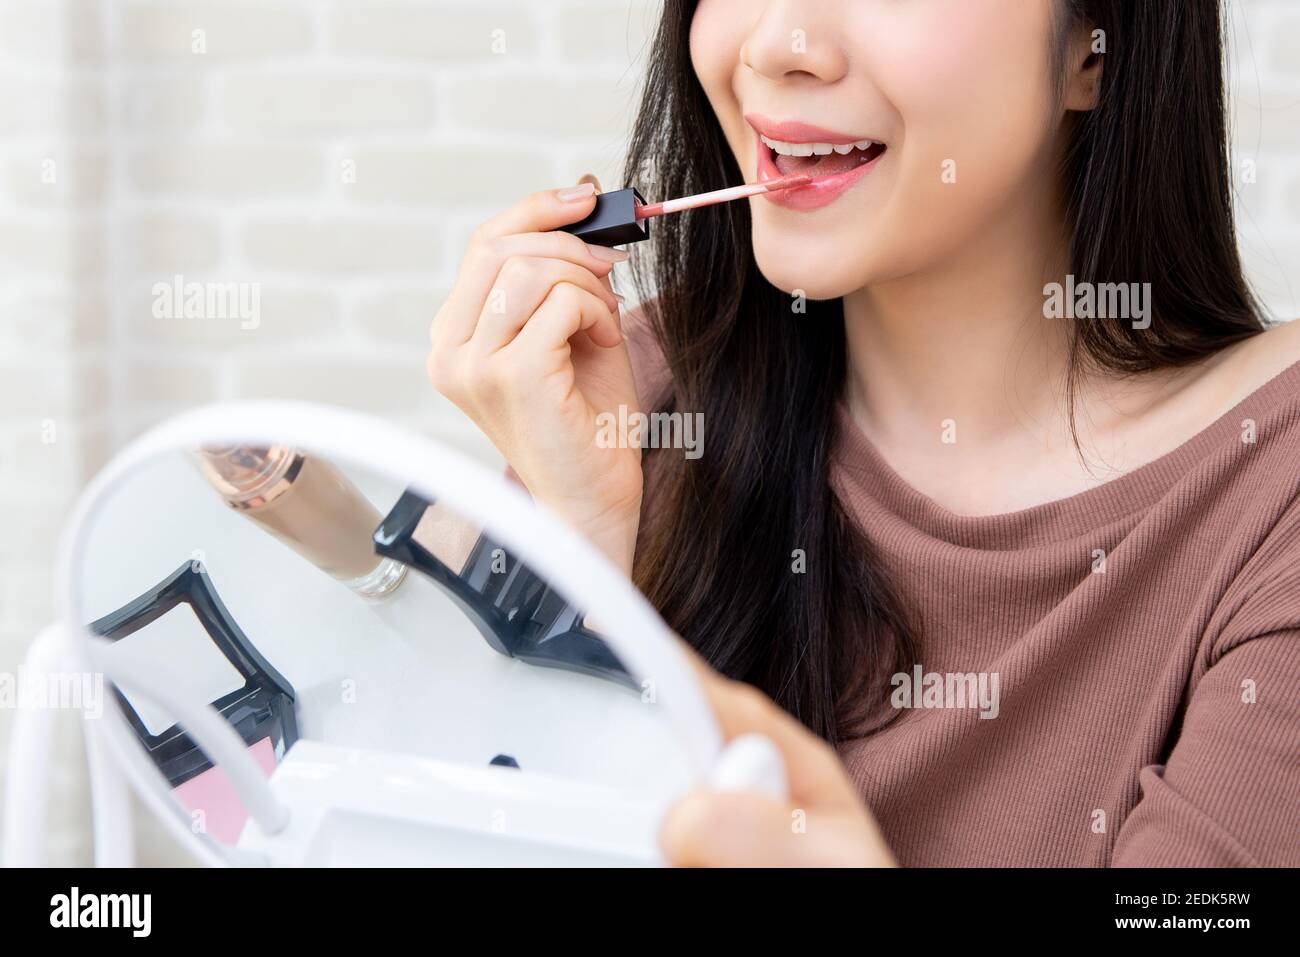 Young beautiful woman professional beauty vlogger or blogger applying lipstick cream to her mouth, doing cosmetic makeup tutorial Stock Photo